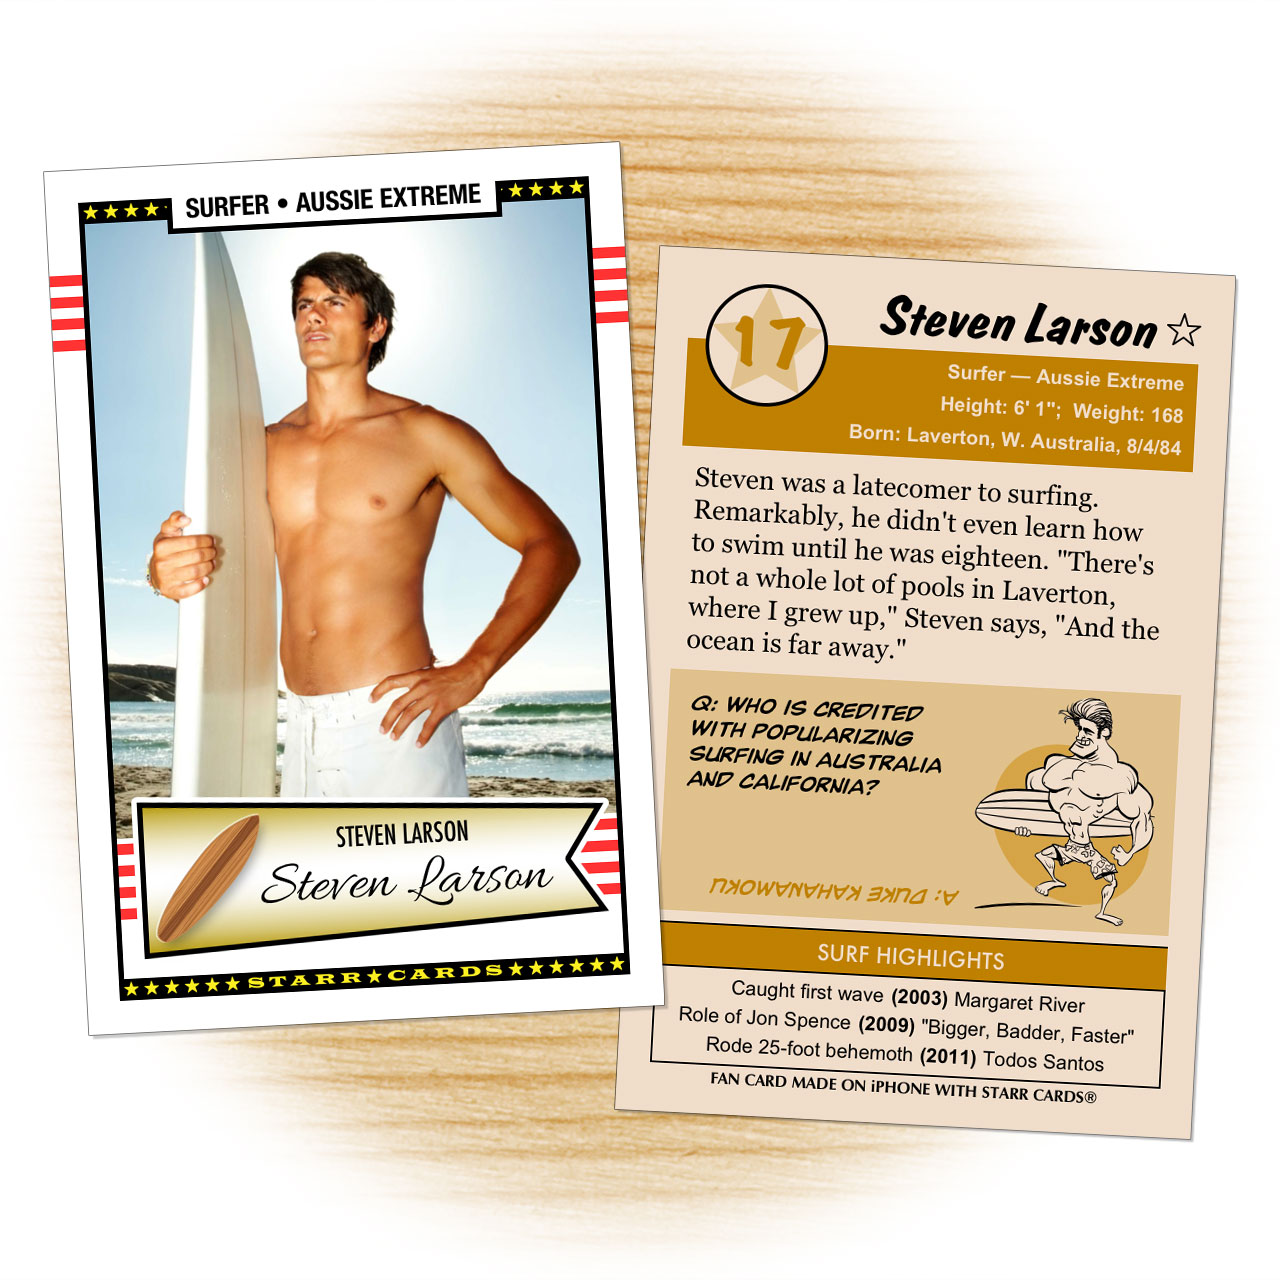 Surfer card template from Starr Cards Surfing Card Maker.